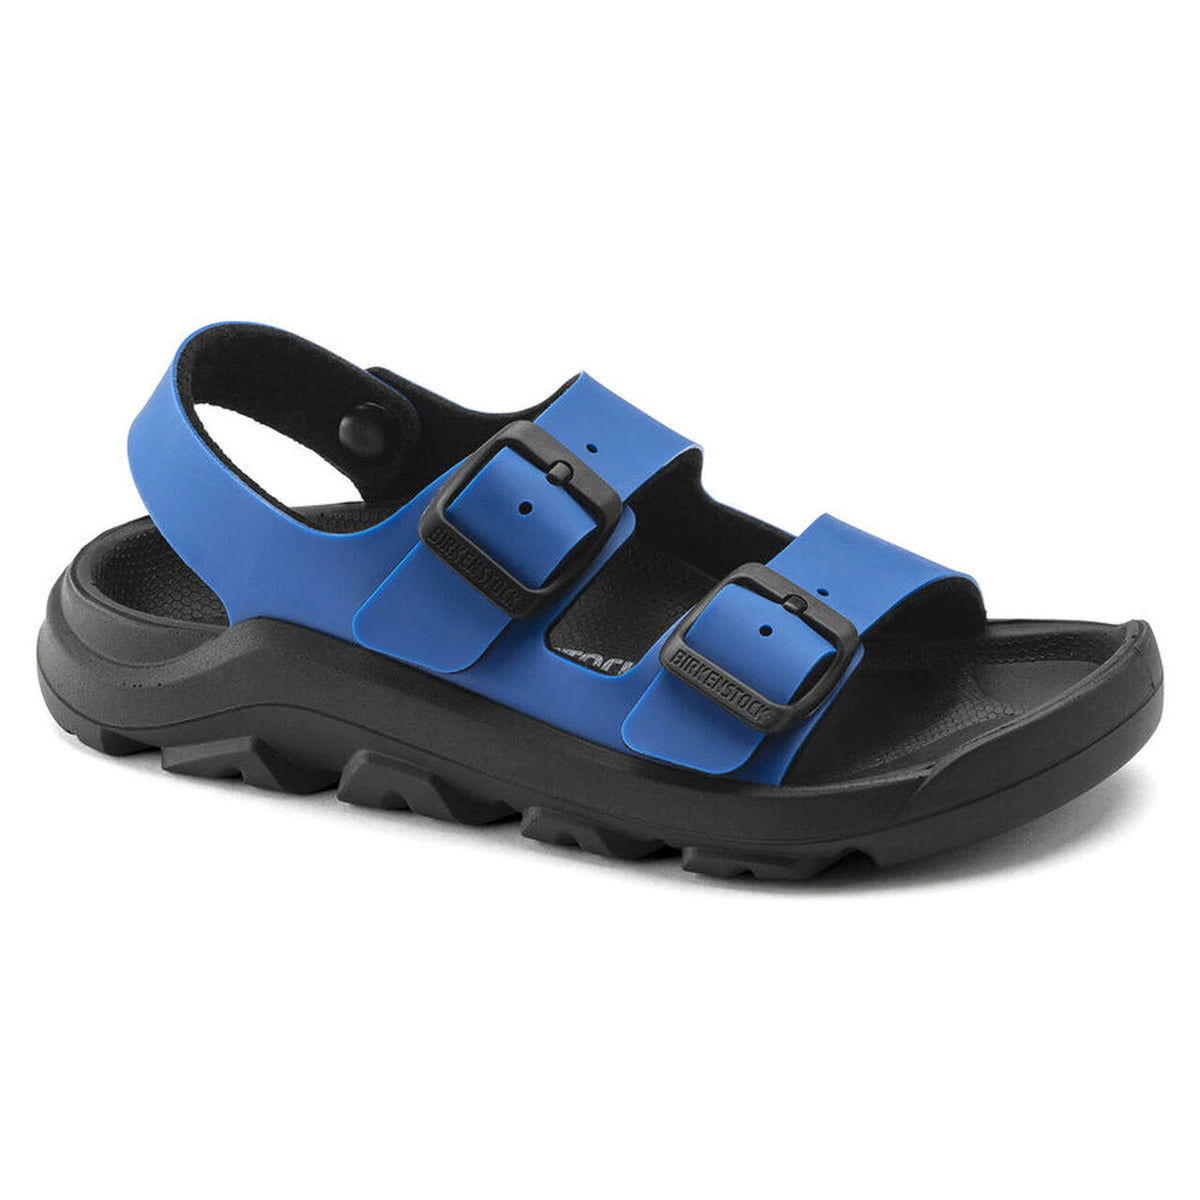 A pair of blue and black Birkenstock Mogami sports sandals with adjustable straps and a waterproof footbed. 
Replace with:
A pair of BIRKENSTOCK MOGAMI ICY ULTRA BLUE/BLACK - KIDS sports sandals with adjustable straps and a waterproof footbed.